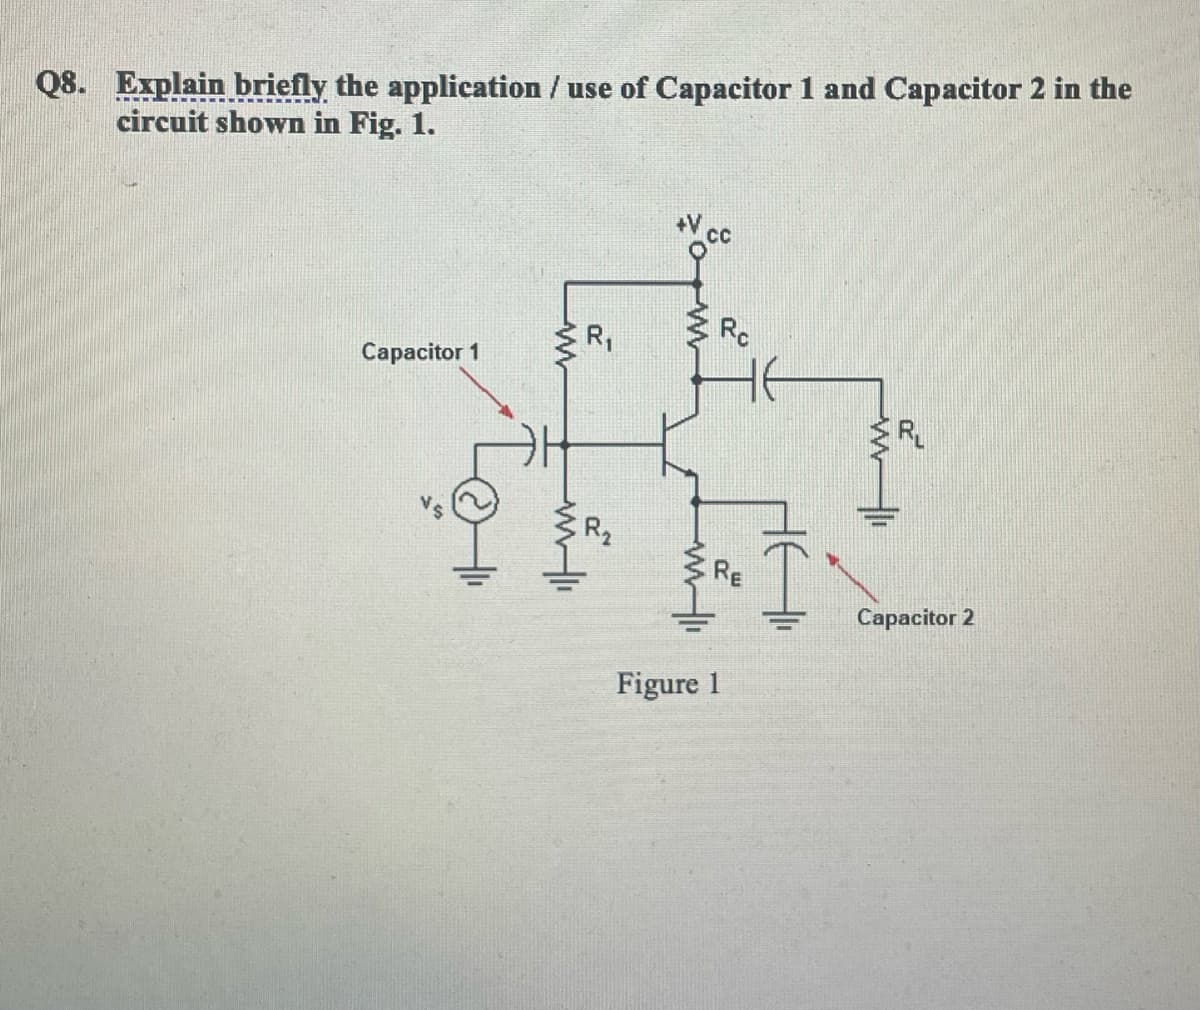 Q8. Explain briefly the application / use of Capacitor 1 and Capacitor 2 in the
circuit shown in Fig. 1.
R,
Rc
Capacitor 1
R.
RE
Capacitor 2
Figure 1
